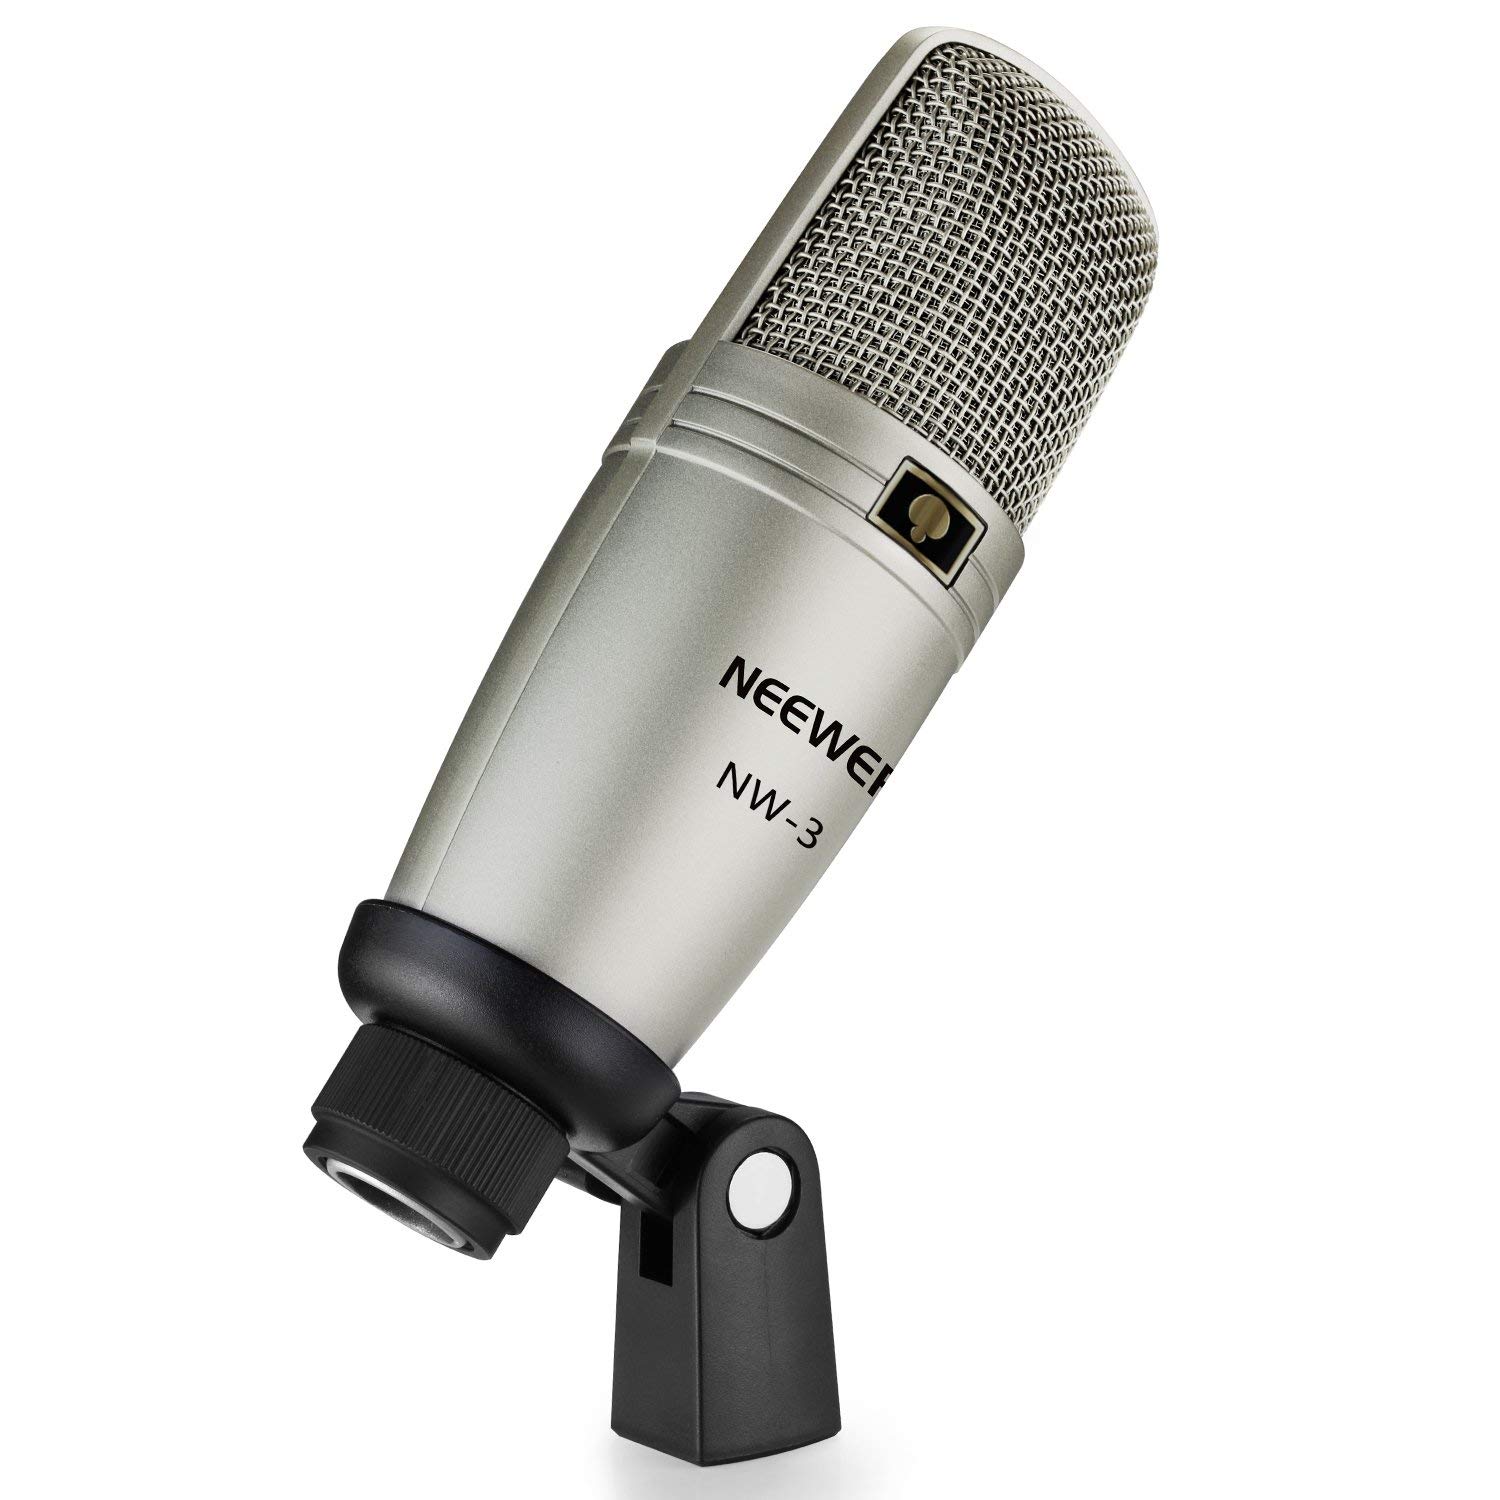 Silver-colored microphone photo